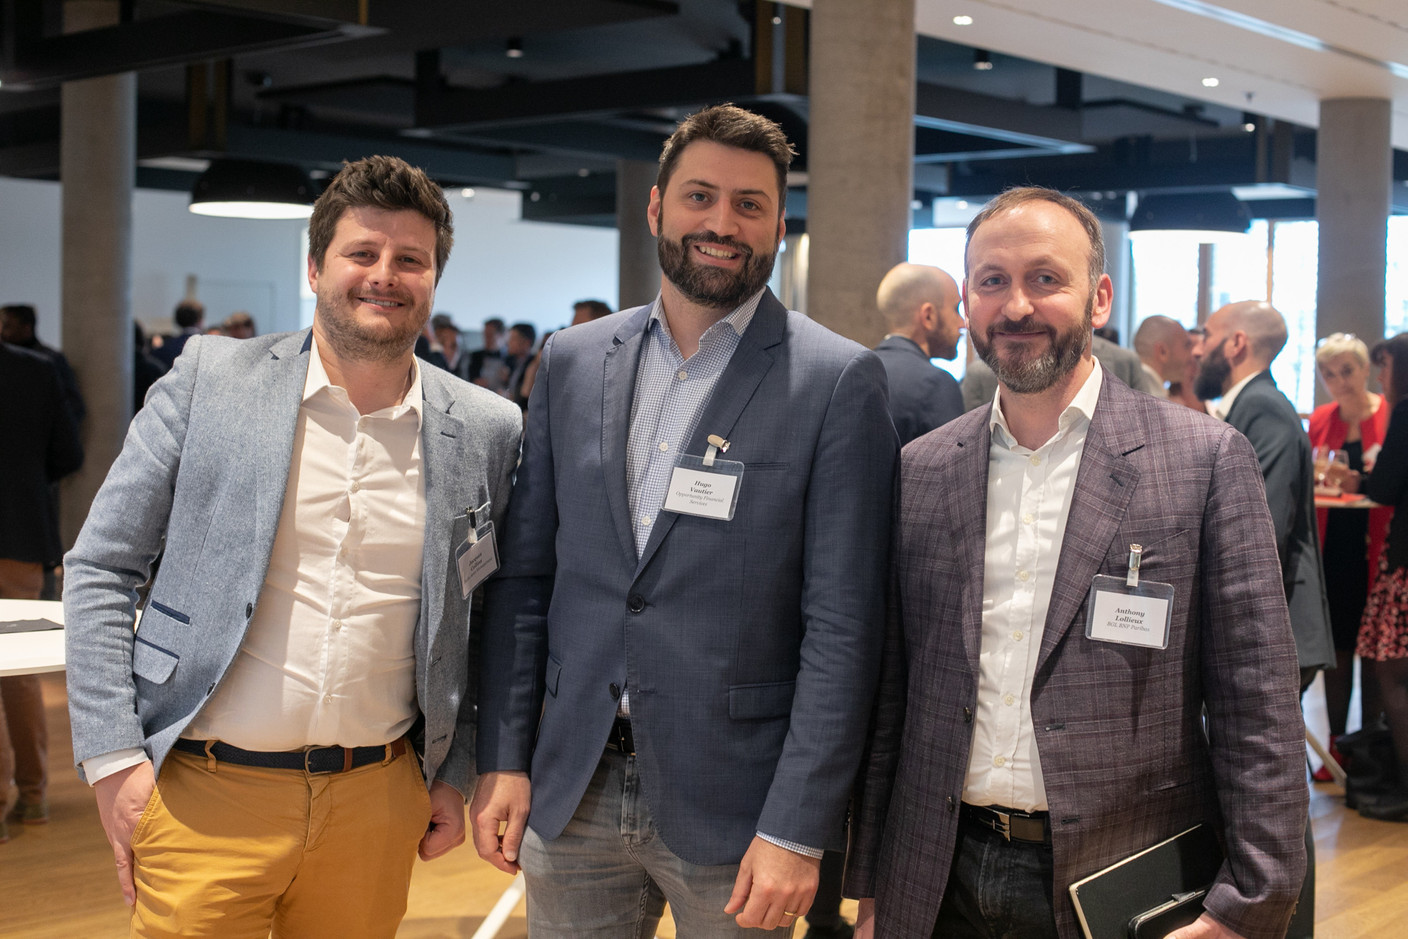 Hugo Vautier (Opportunity Financial Services), Anthony Lollieux (BGL BNP Paribas) at the 2023 Cryptoassets Management Conference, hosted by PwC Luxembourg on 4 May 2023. Photo: Matic Zorman / Maison Moderne